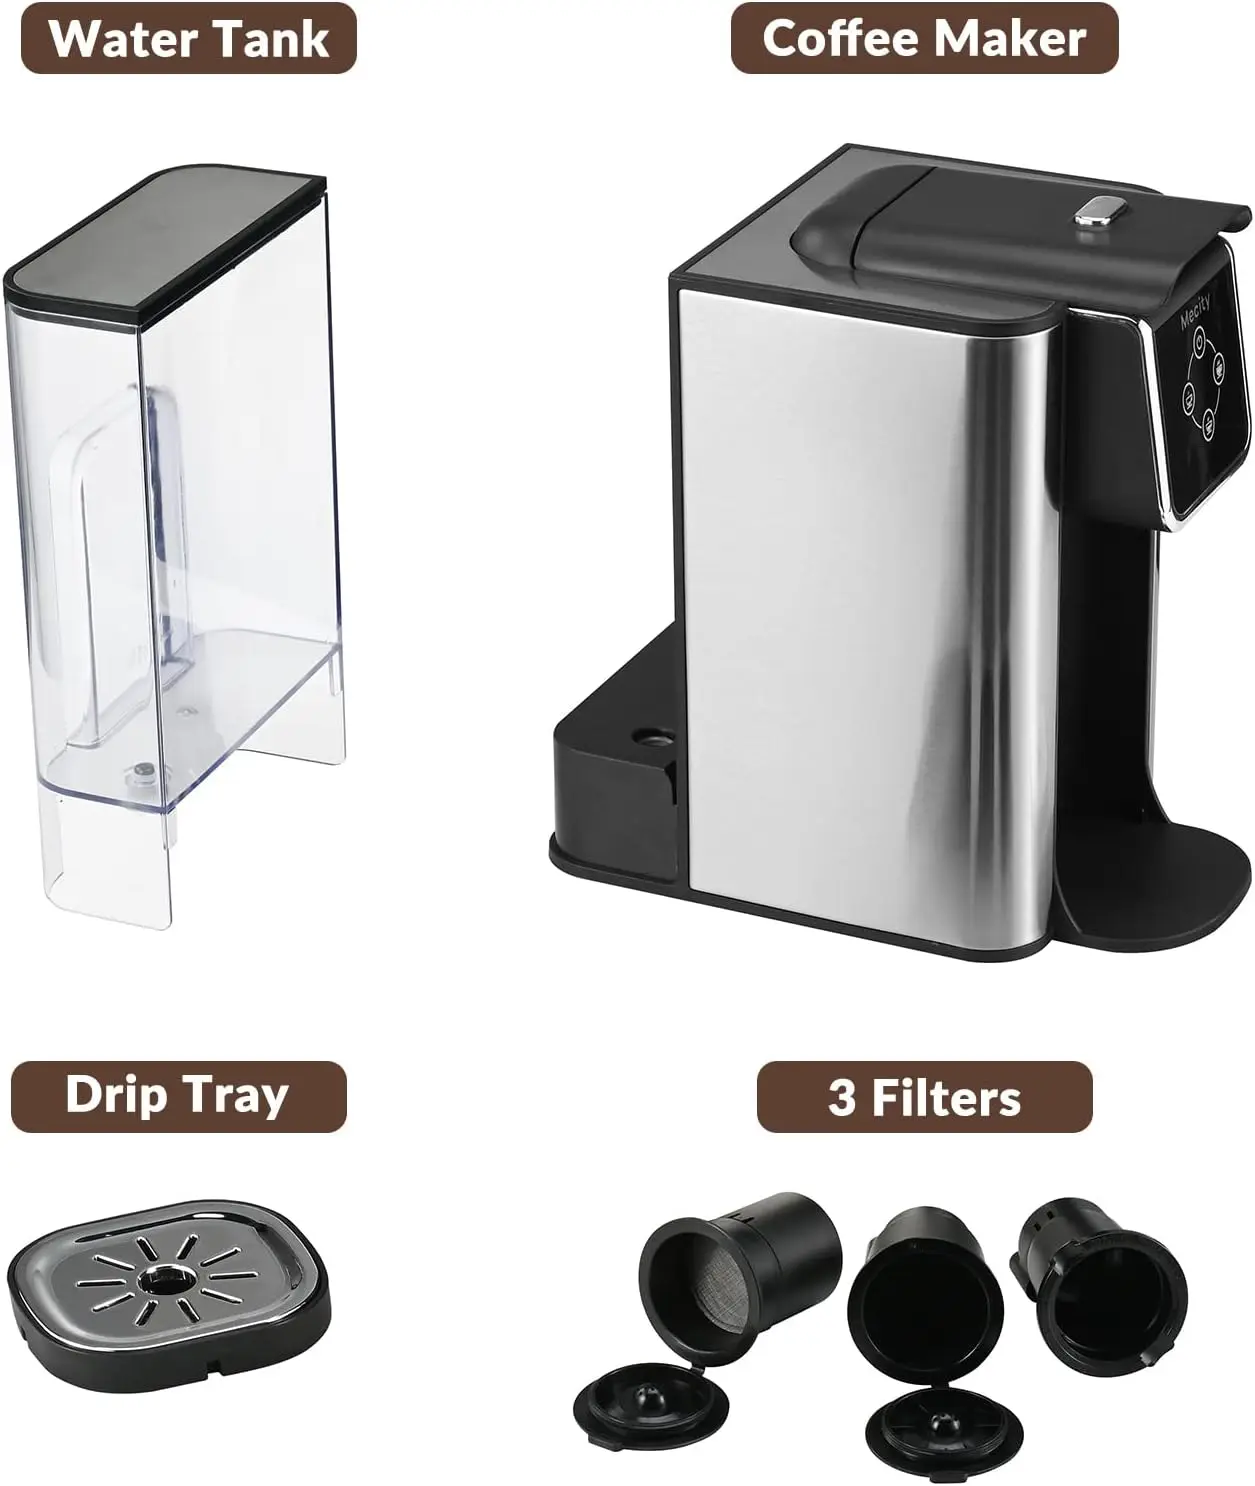 Mecity Coffee Maker 3-in-1 single cup coffee maker for K pod coffee  capsules, ground coffee makers, loose tea makers - AliExpress